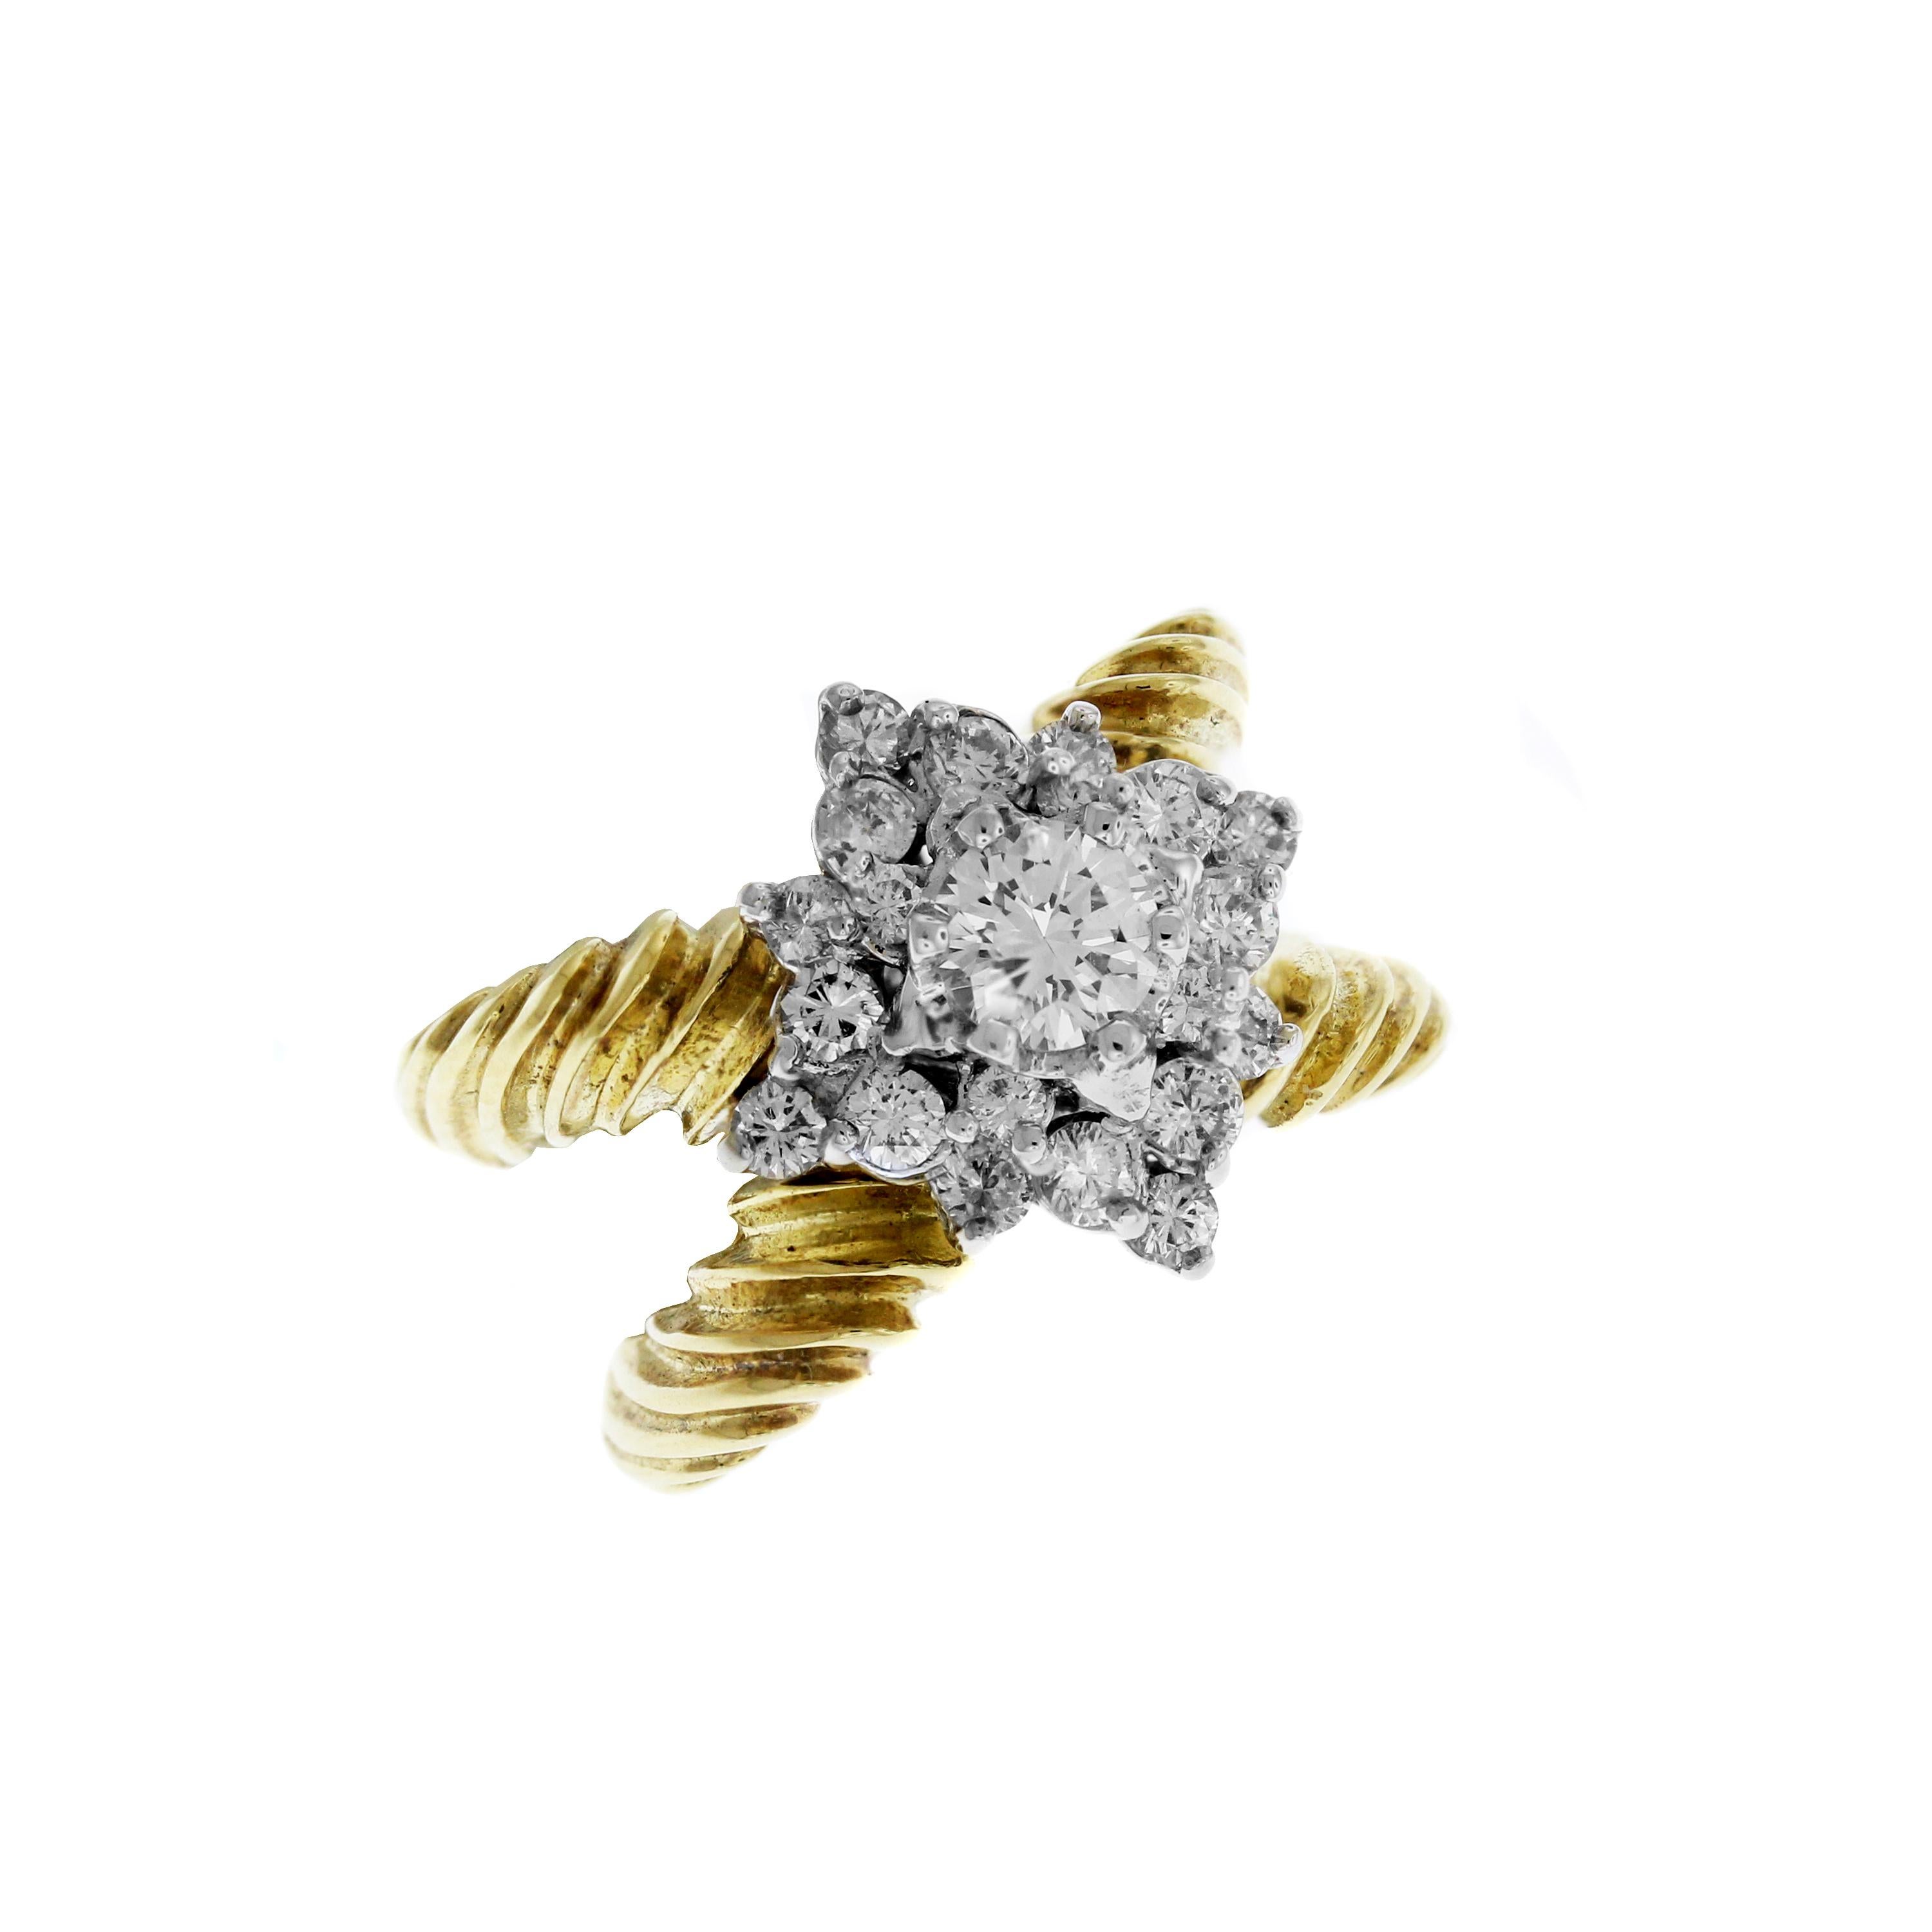 IF YOU ARE REALLY INTERESTED, CONTACT US WITH ANY REASONABLE OFFER. WE WILL TRY OUR BEST TO MAKE YOU HAPPY!

18K Yellow and White Gold X Ring with Diamond Cluster center

Bands are done with hand-twisted wiring in the shape of an X

1.50 carat G